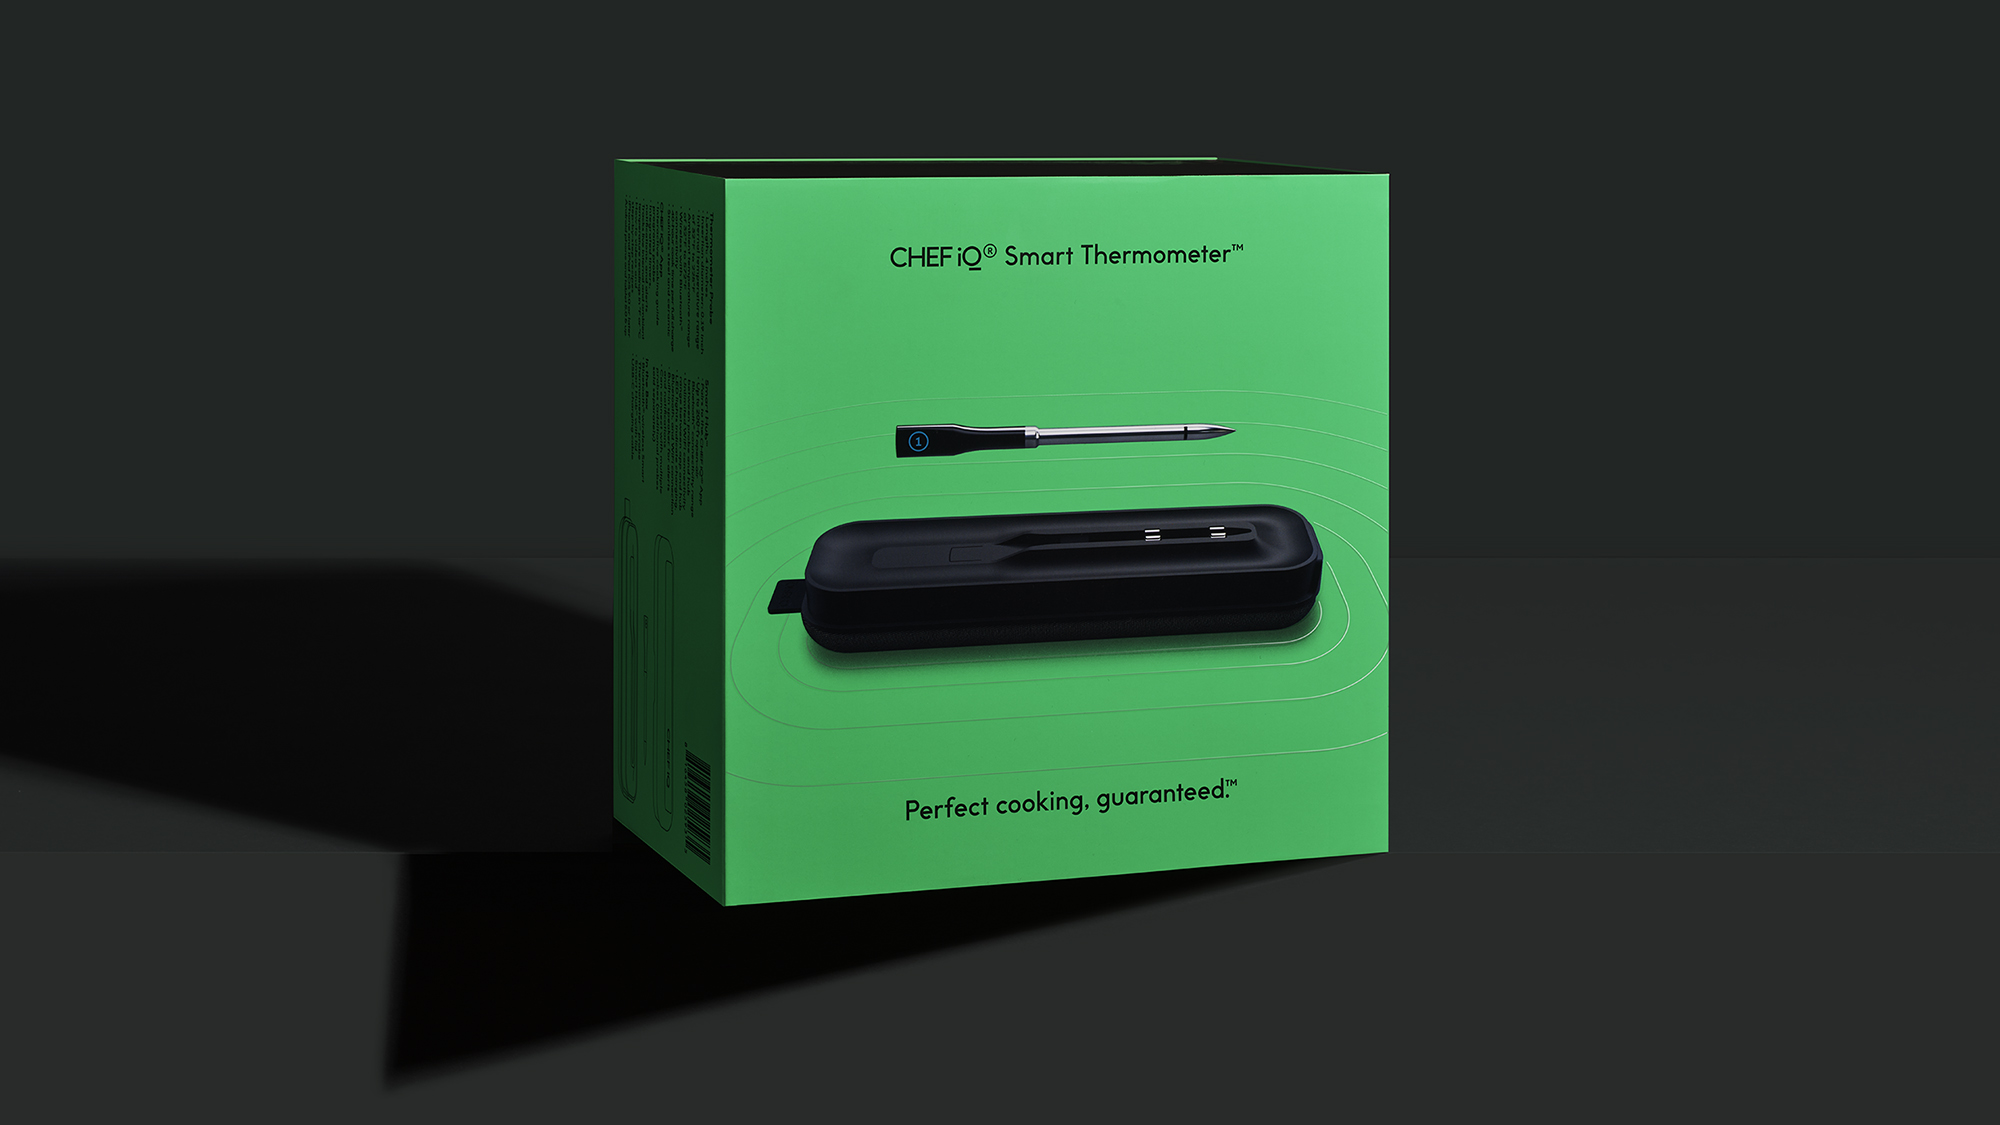 The World’s Slimmest Wireless Thermometer Puts the Theme of Heat Throughout the Unboxing Experience